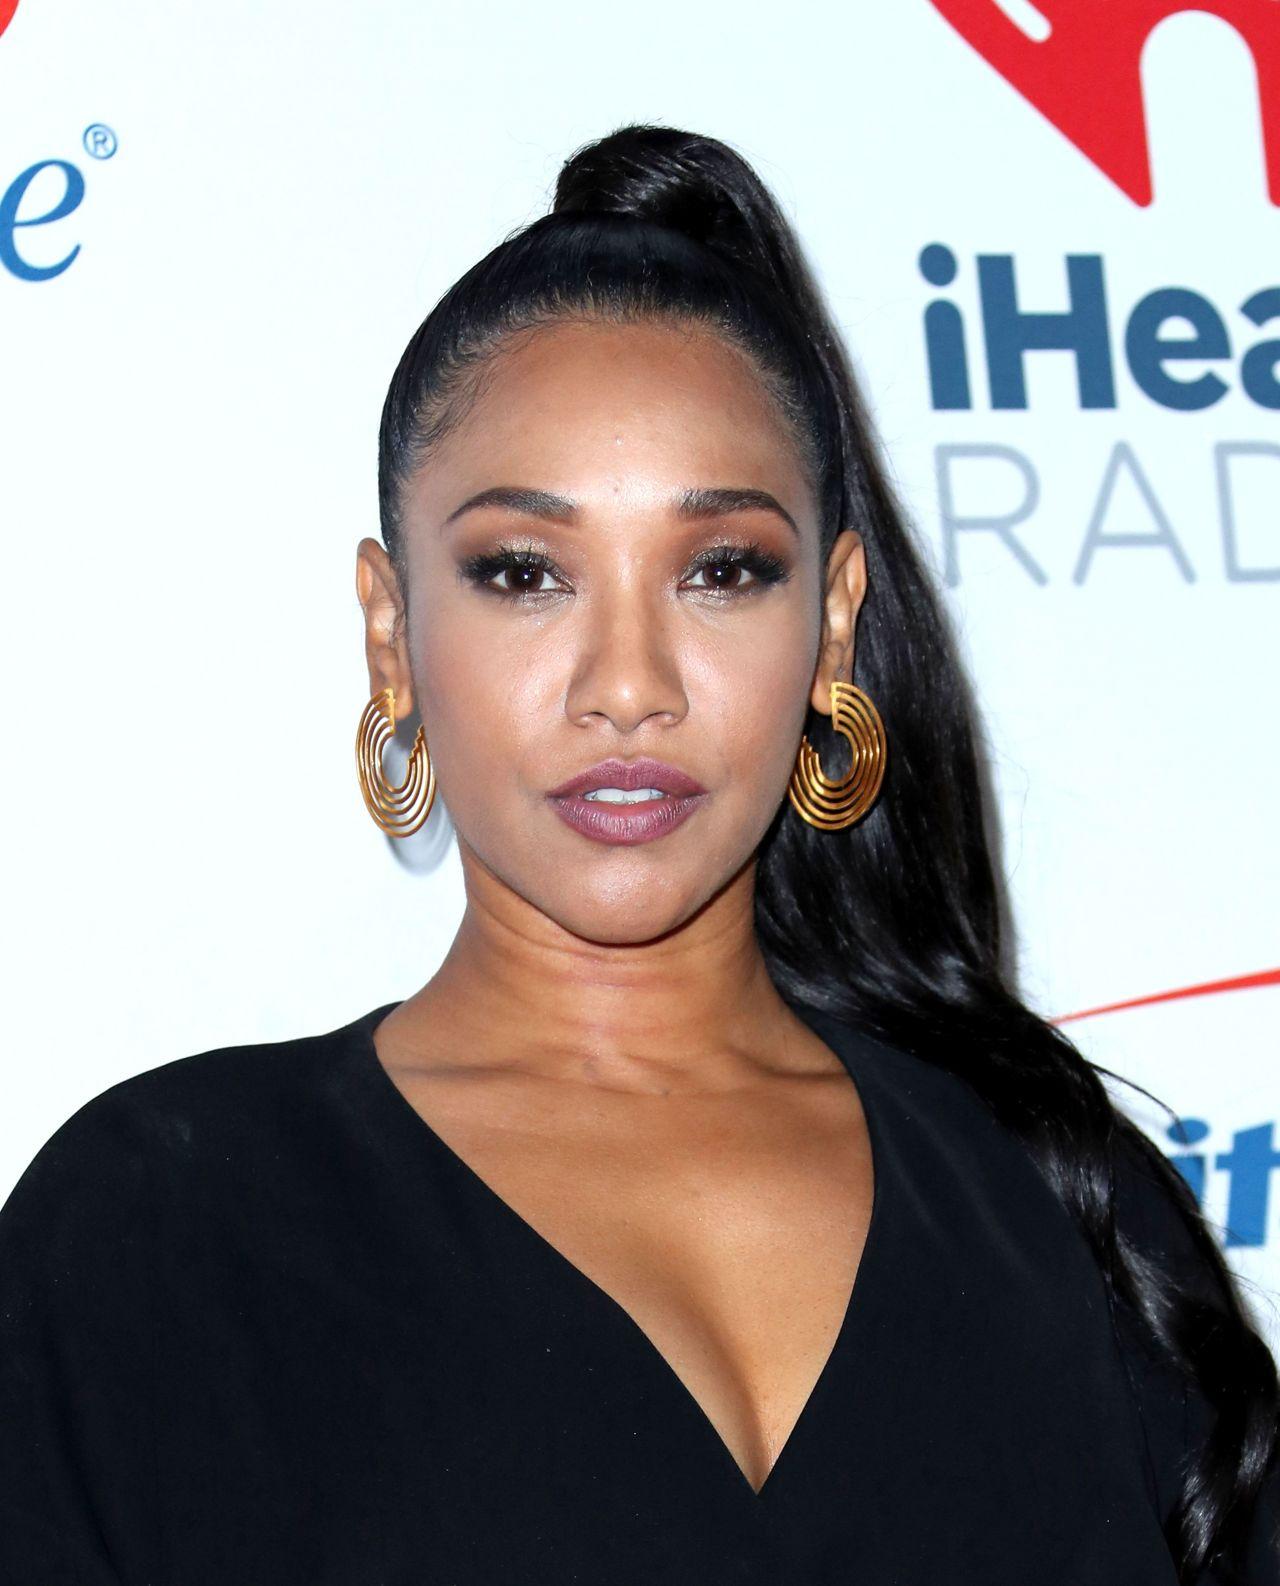 70+ Hot Pictures Of Candice Patton Who Plays Iris West In Flash TV Series 37